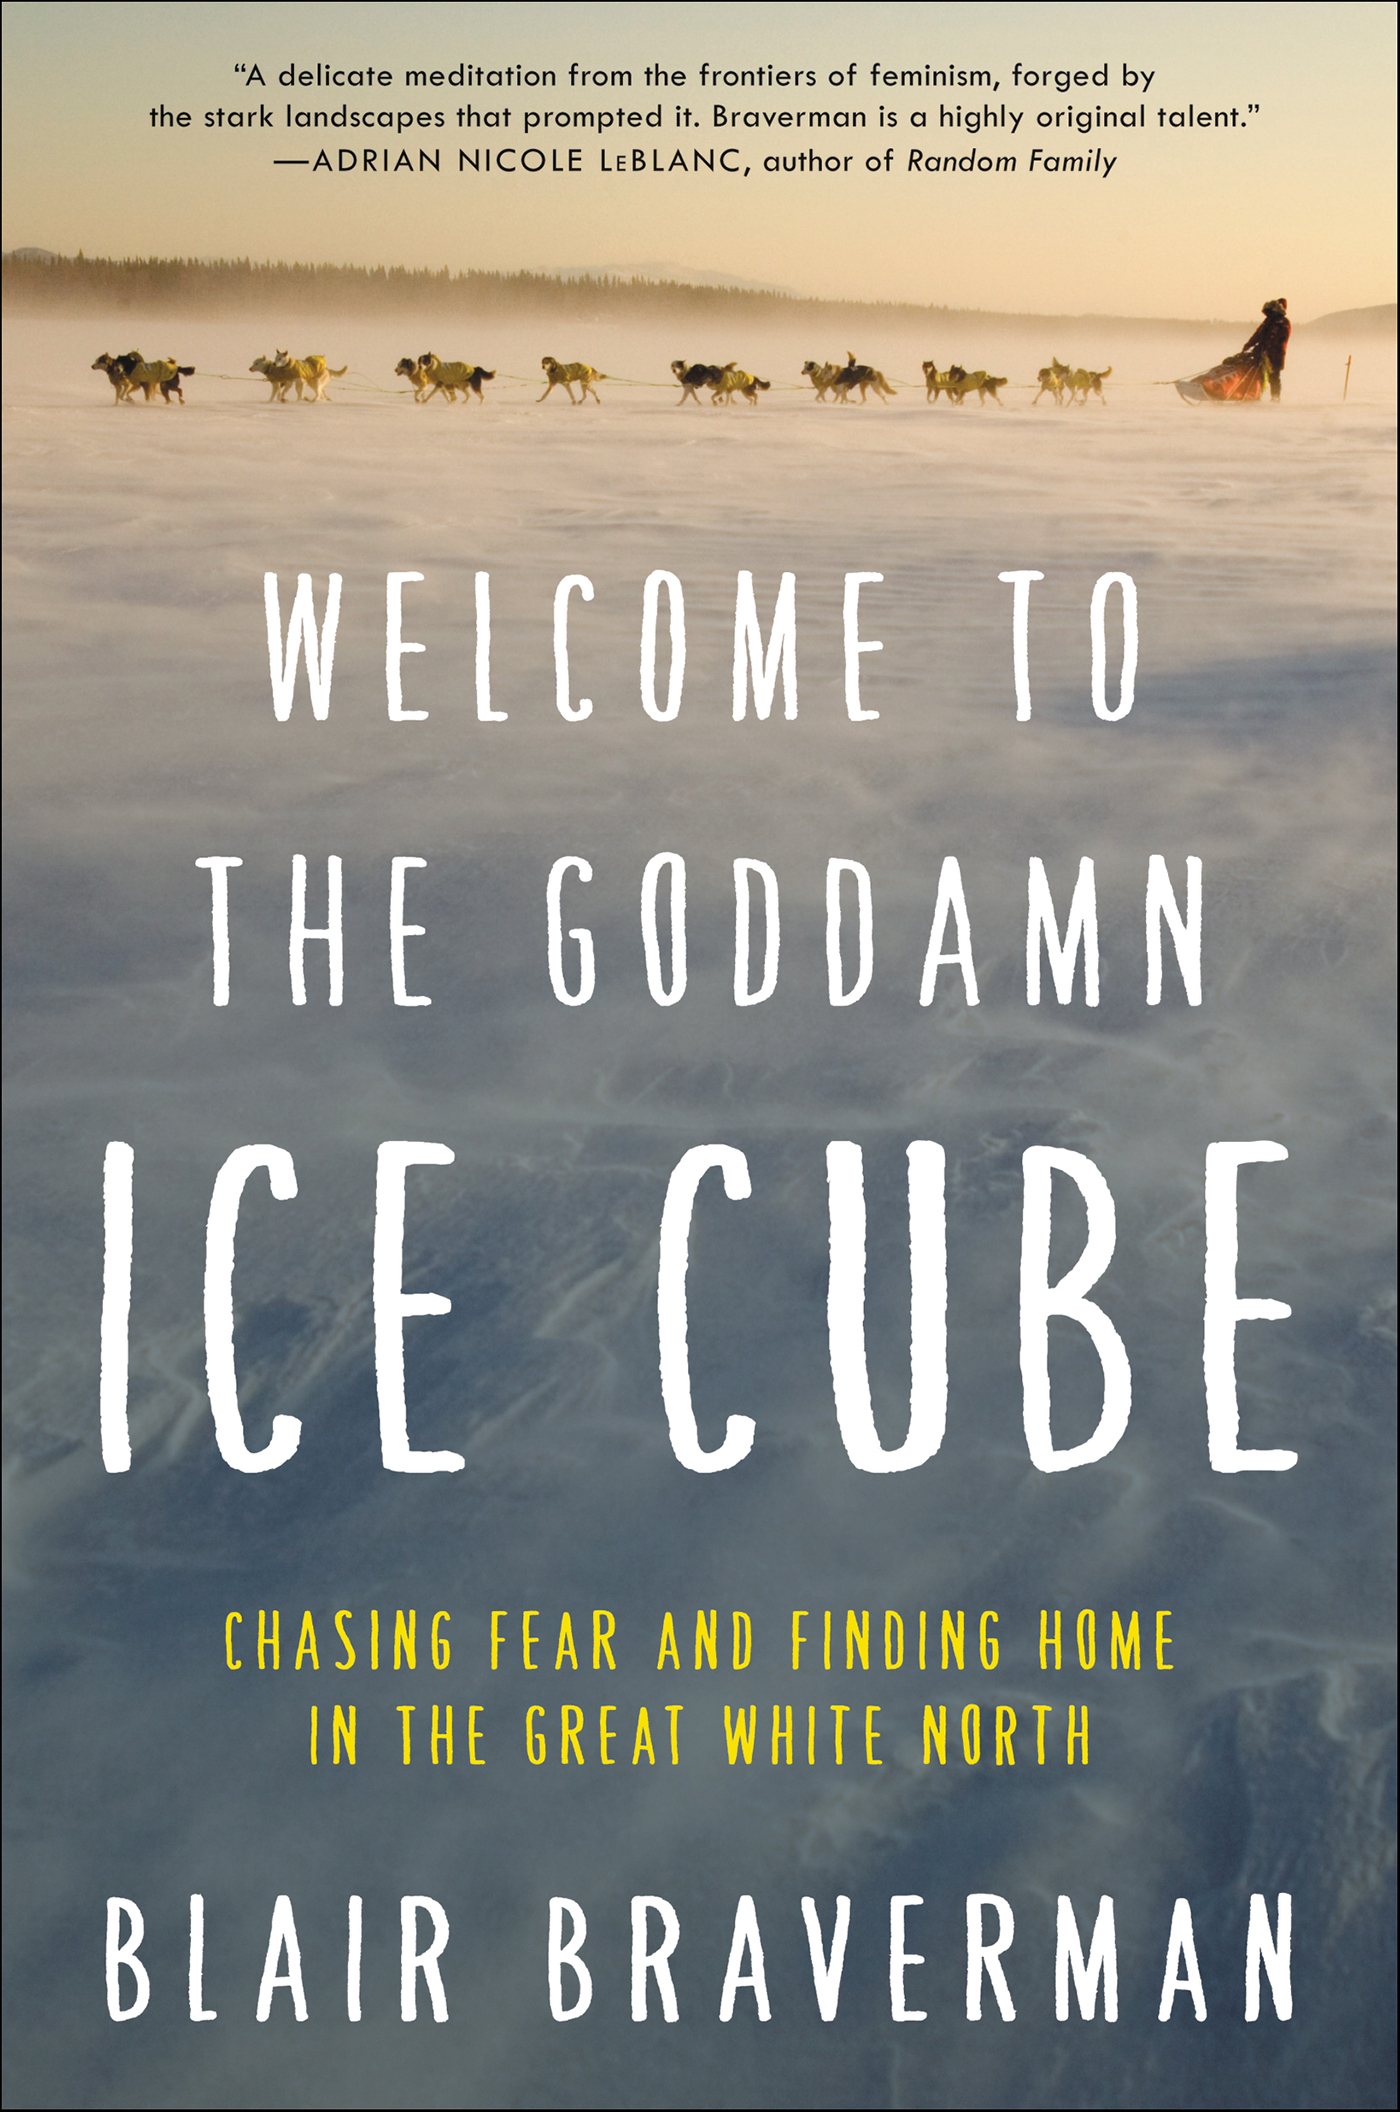 Welcome to the goddamn ice cube chasing fear and finding home in the great white north cover image